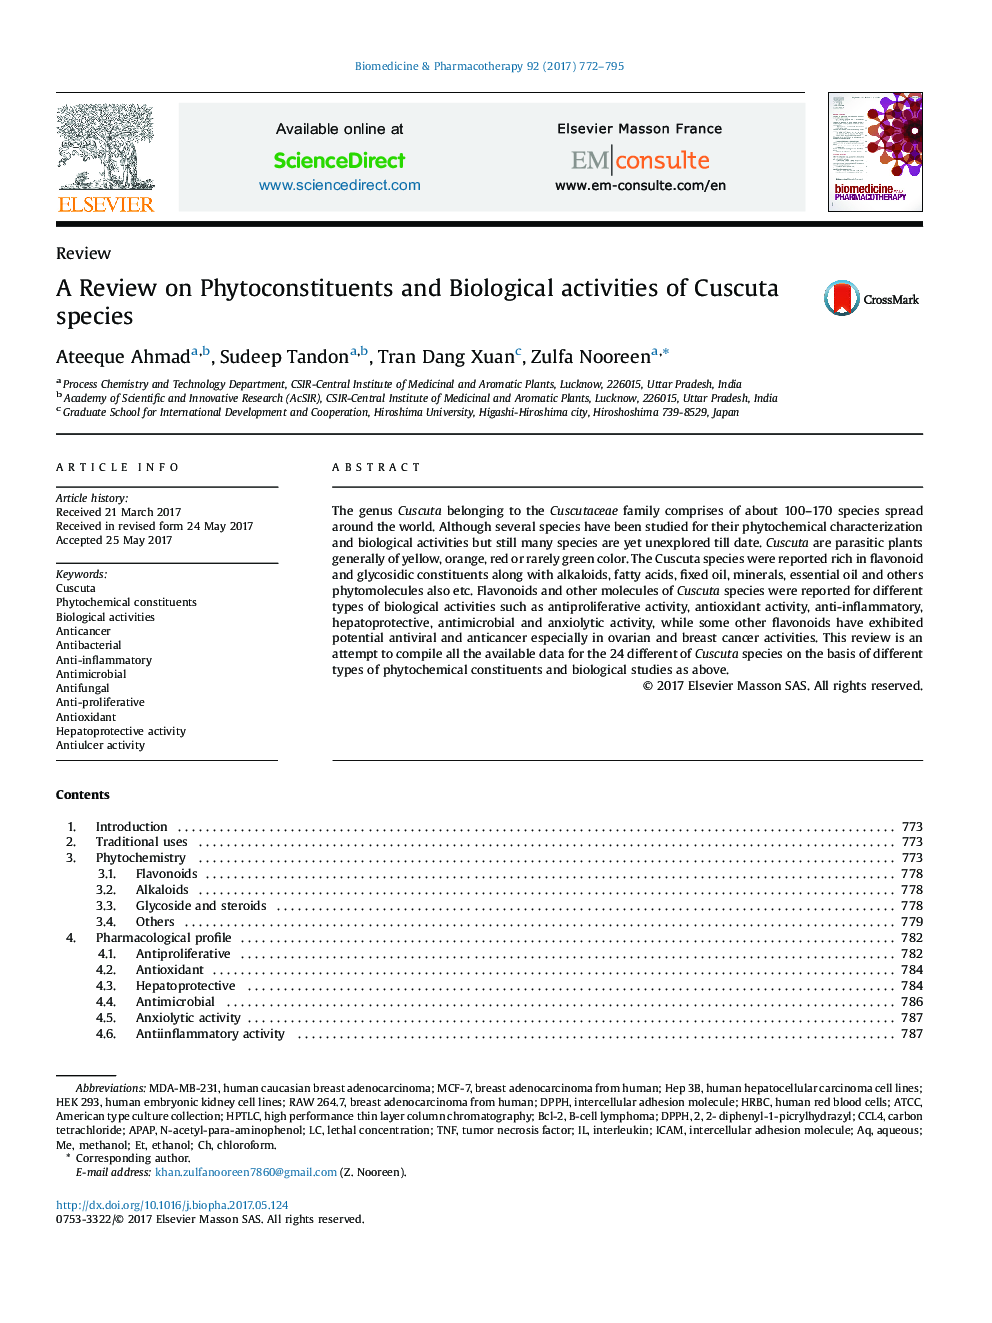 A Review on Phytoconstituents and Biological activities of Cuscuta species